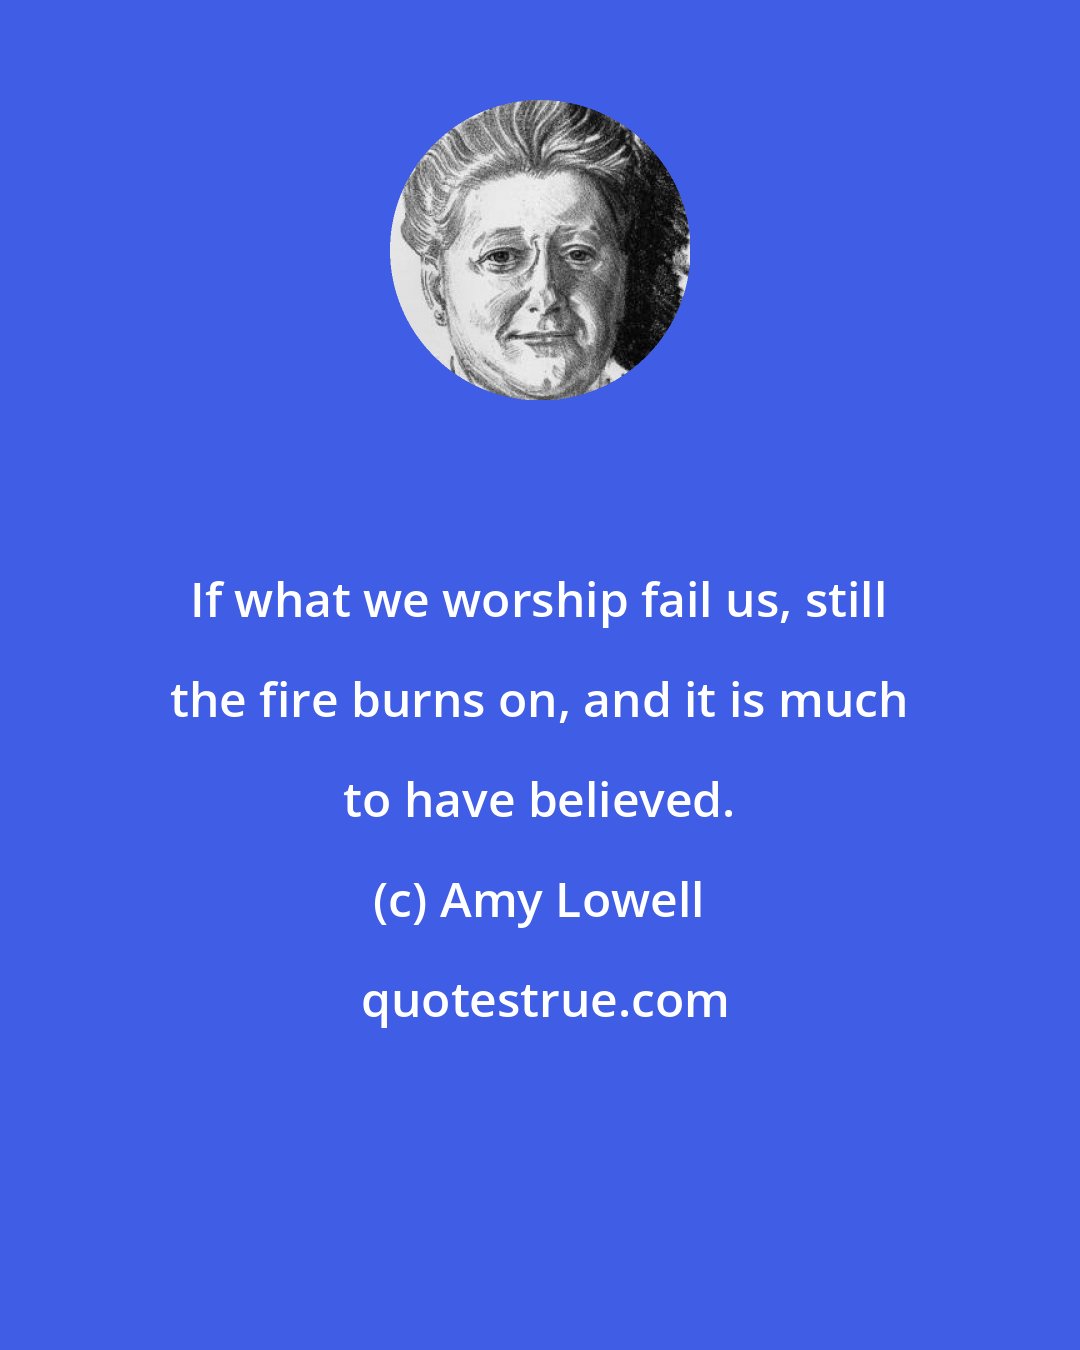 Amy Lowell: If what we worship fail us, still the fire burns on, and it is much to have believed.